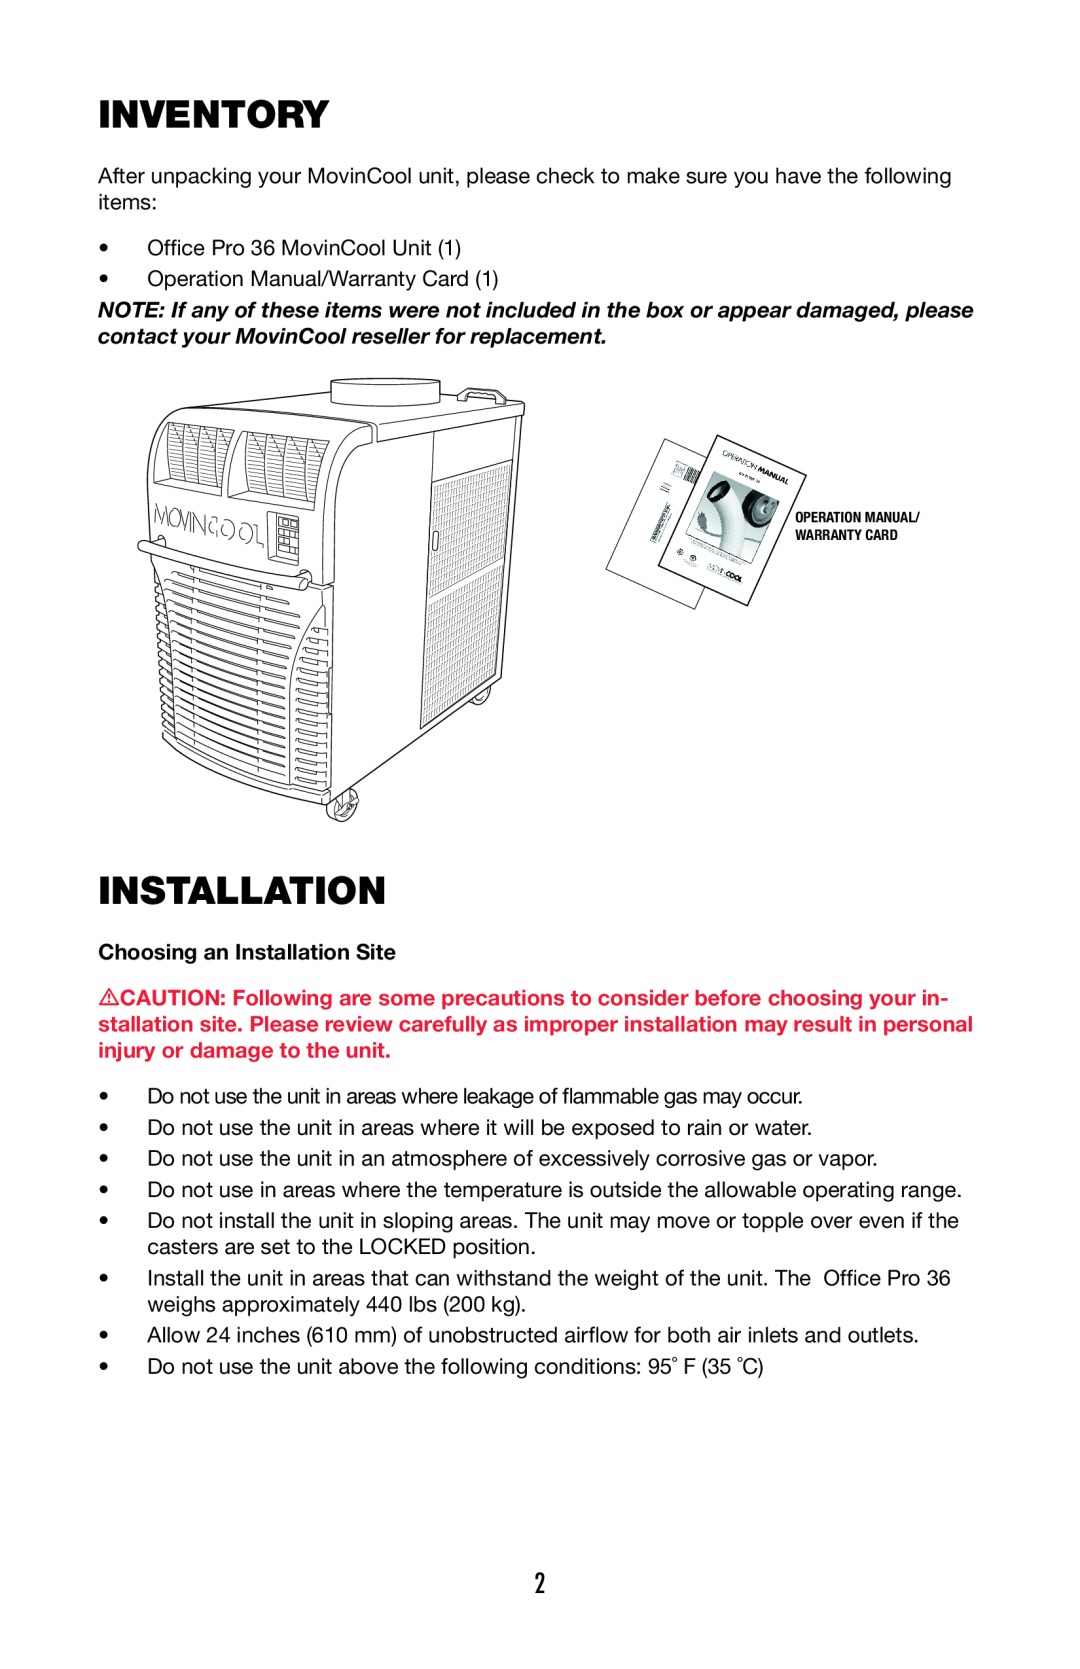 Denso OFFICE PRO 36 operation manual Inventory, Choosing an Installation Site 